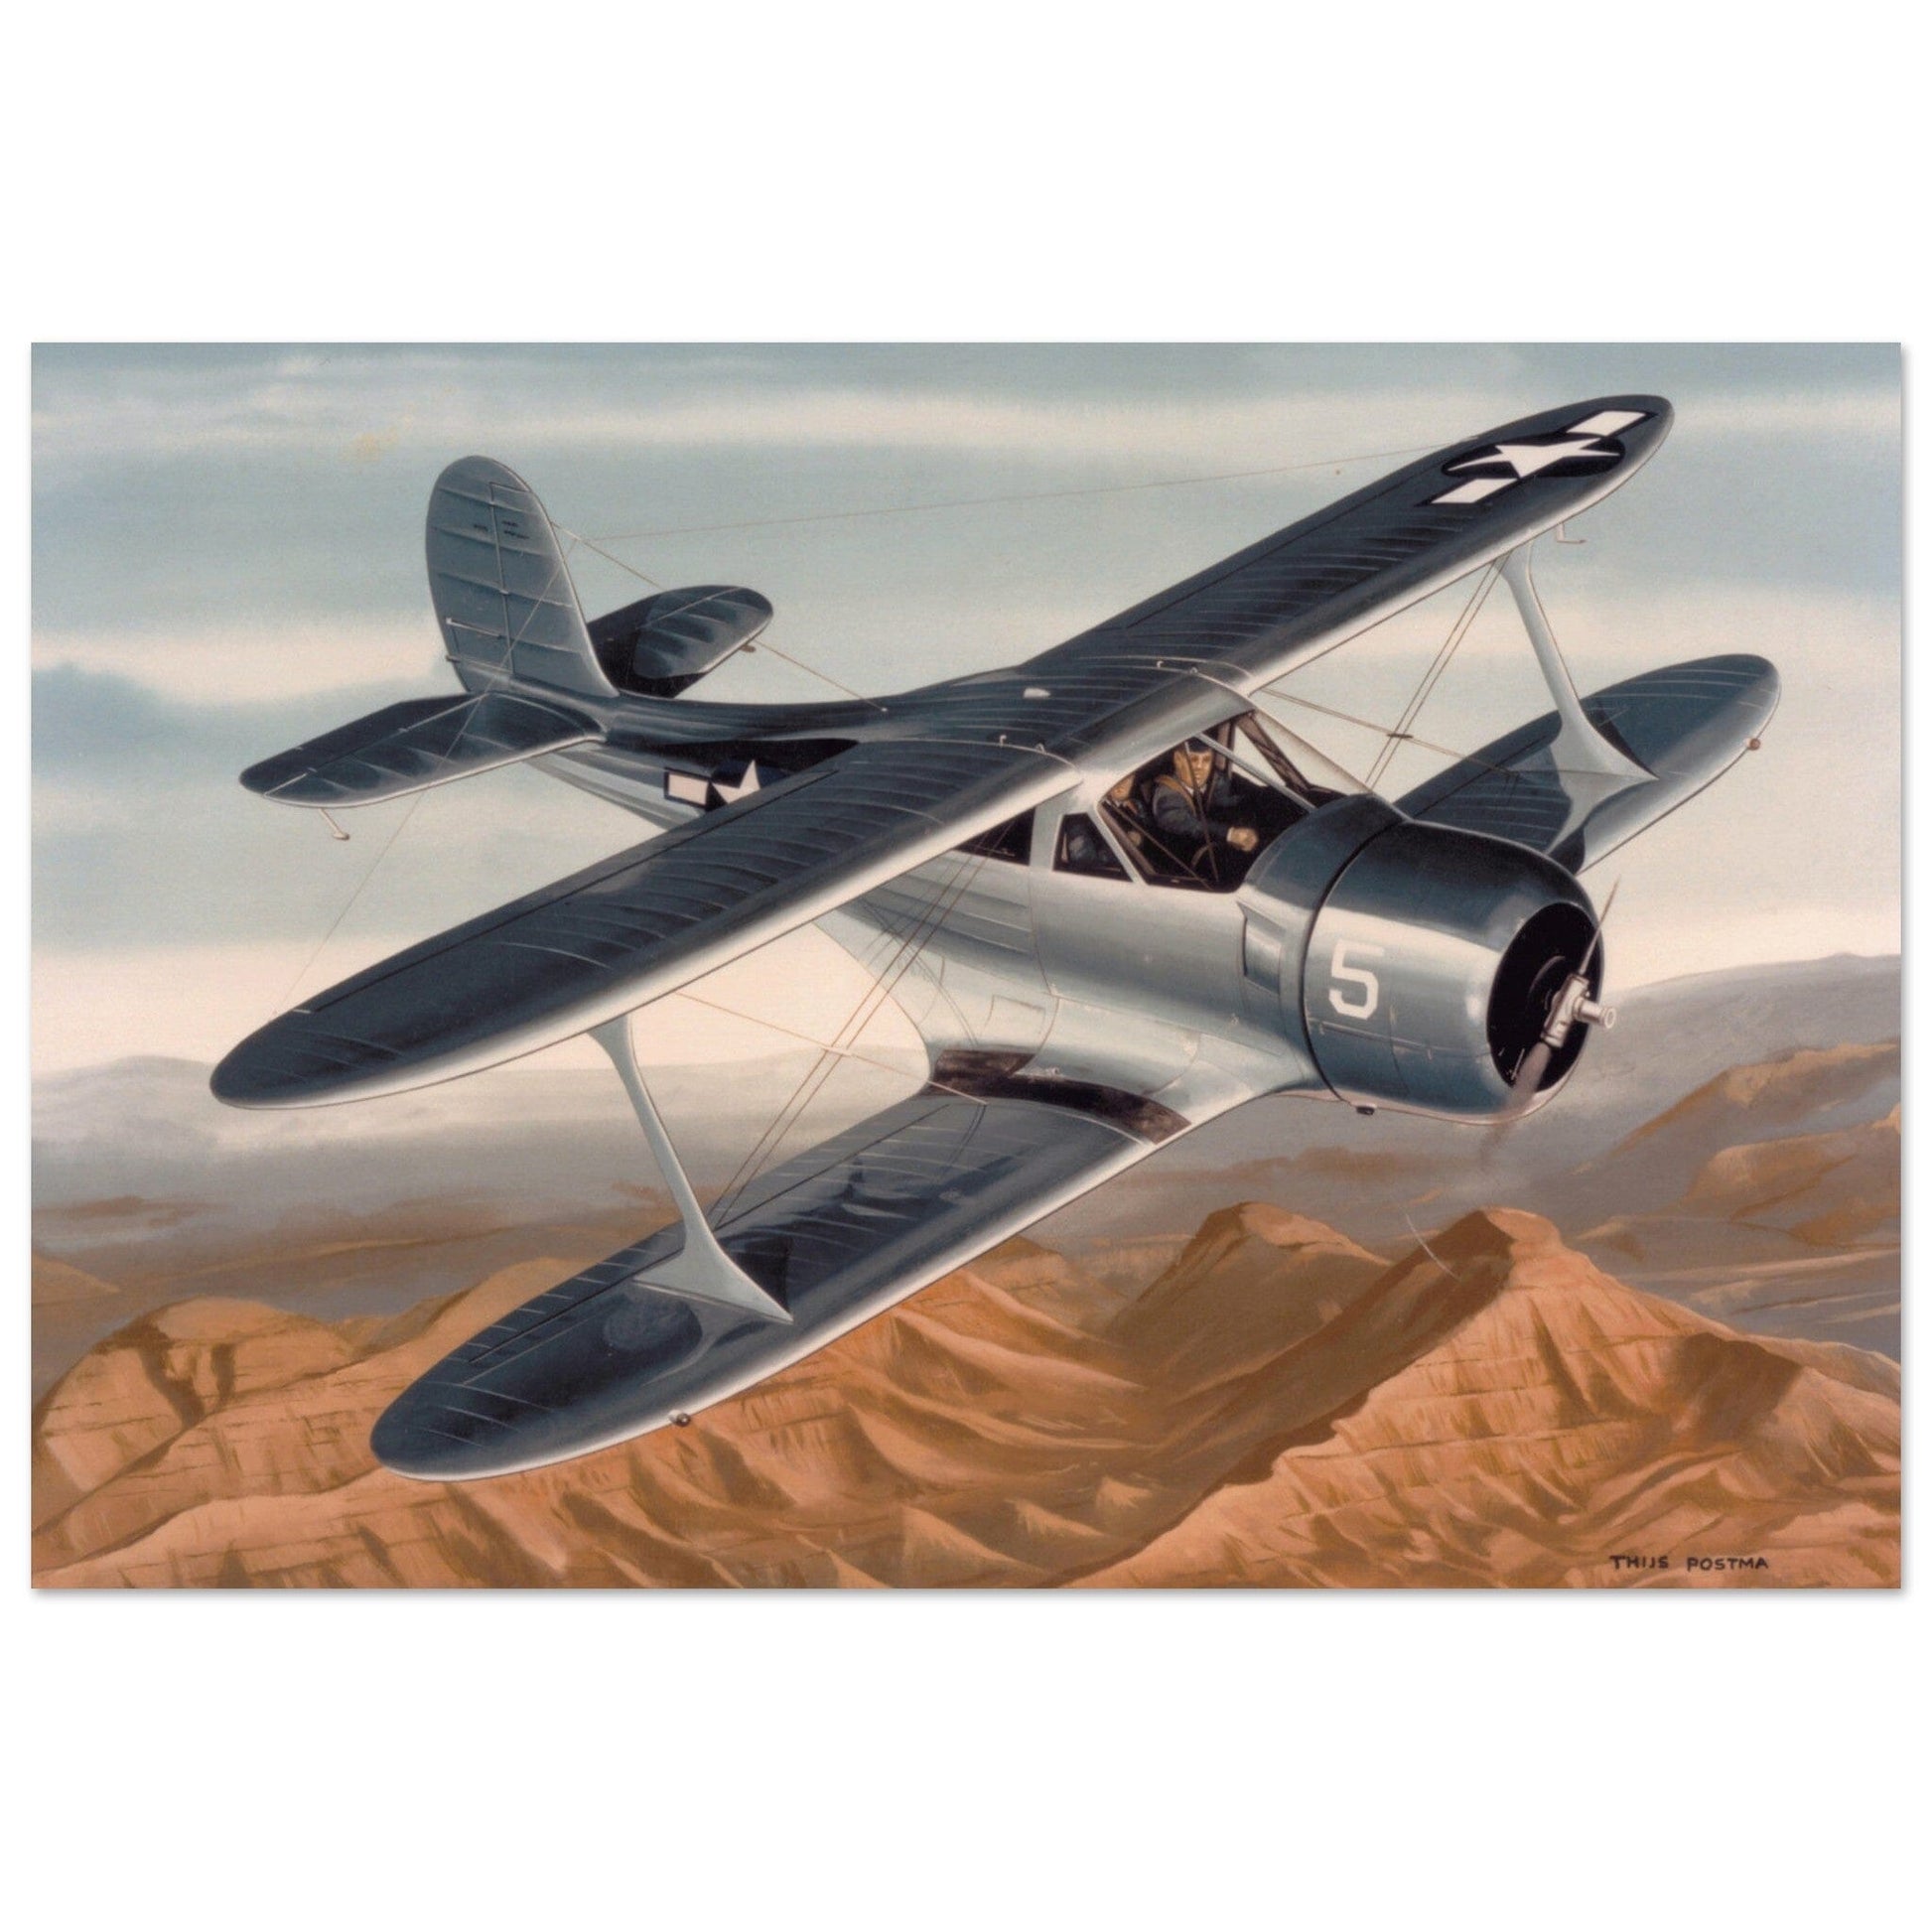 Thijs Postma - Poster - Beechcraft 17 Staggerwing USN Poster Only TP Aviation Art 40x60 cm / 16x24″ 